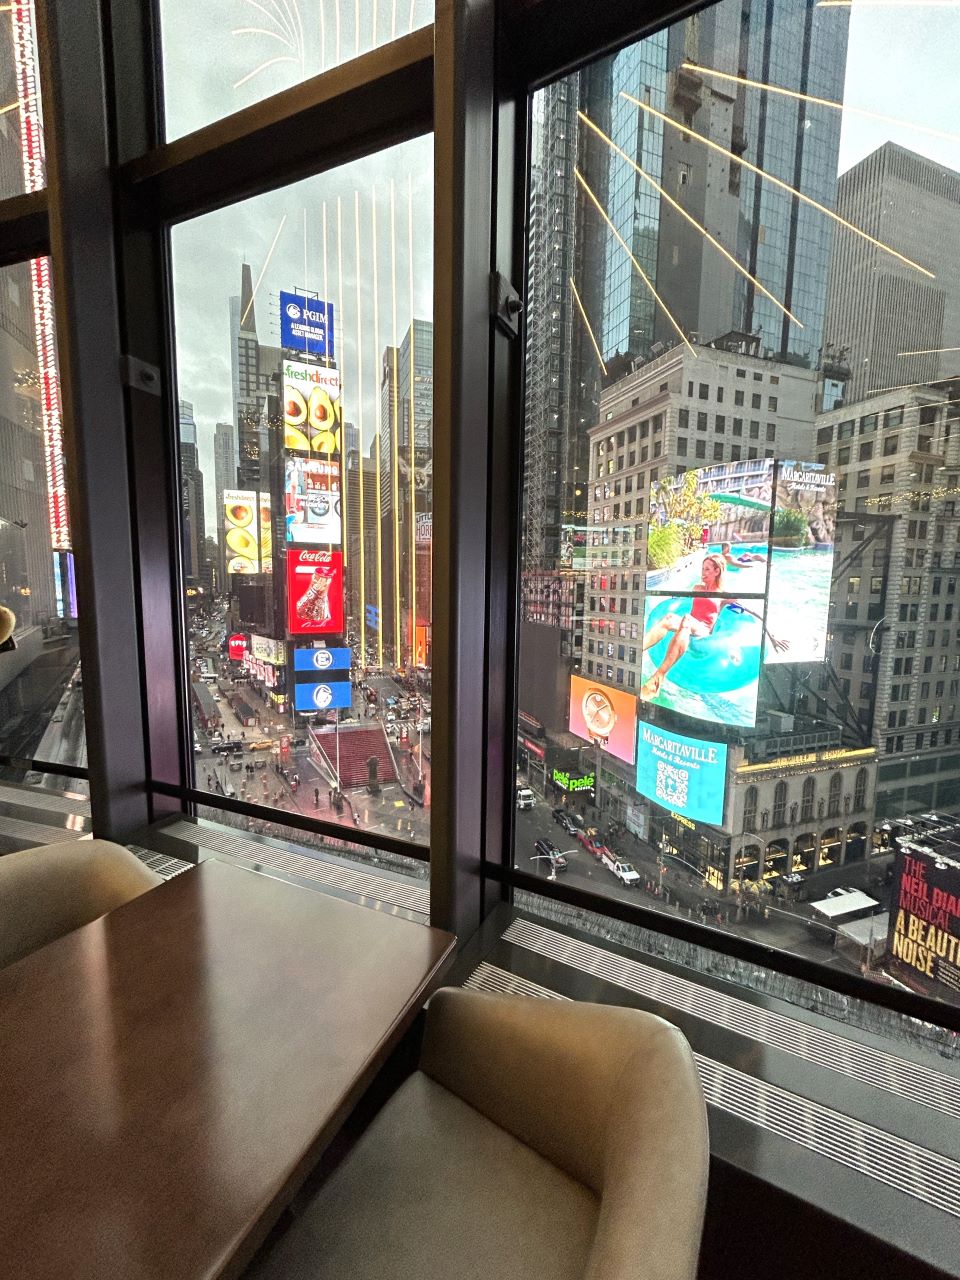 Marriott Marquis Times Square overlooking New York building